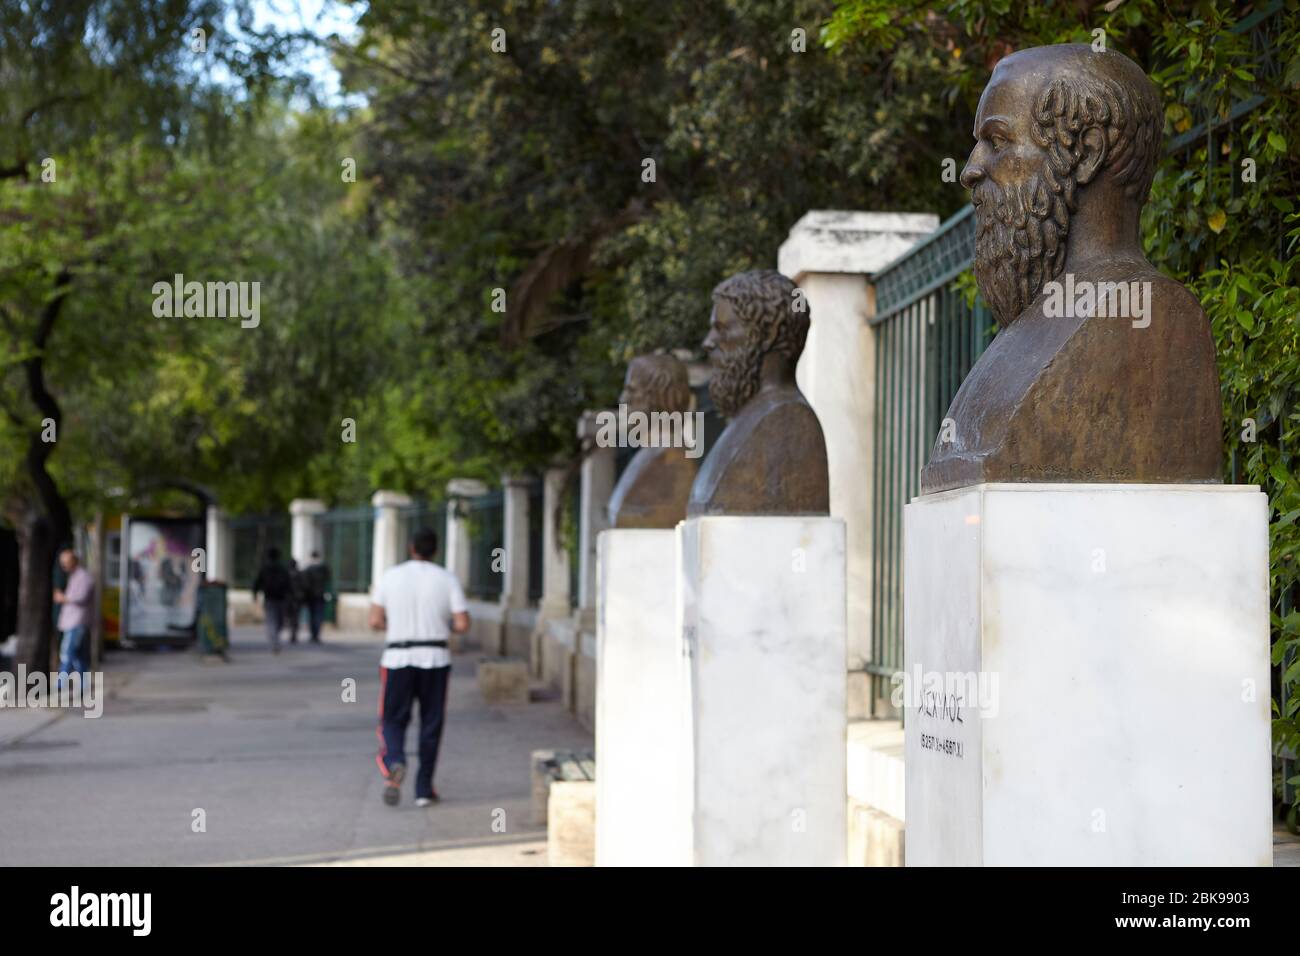 Statues of Aeschylus, Sophocles and Euripides in front of National Garden in Athens, Greece Stock Photo